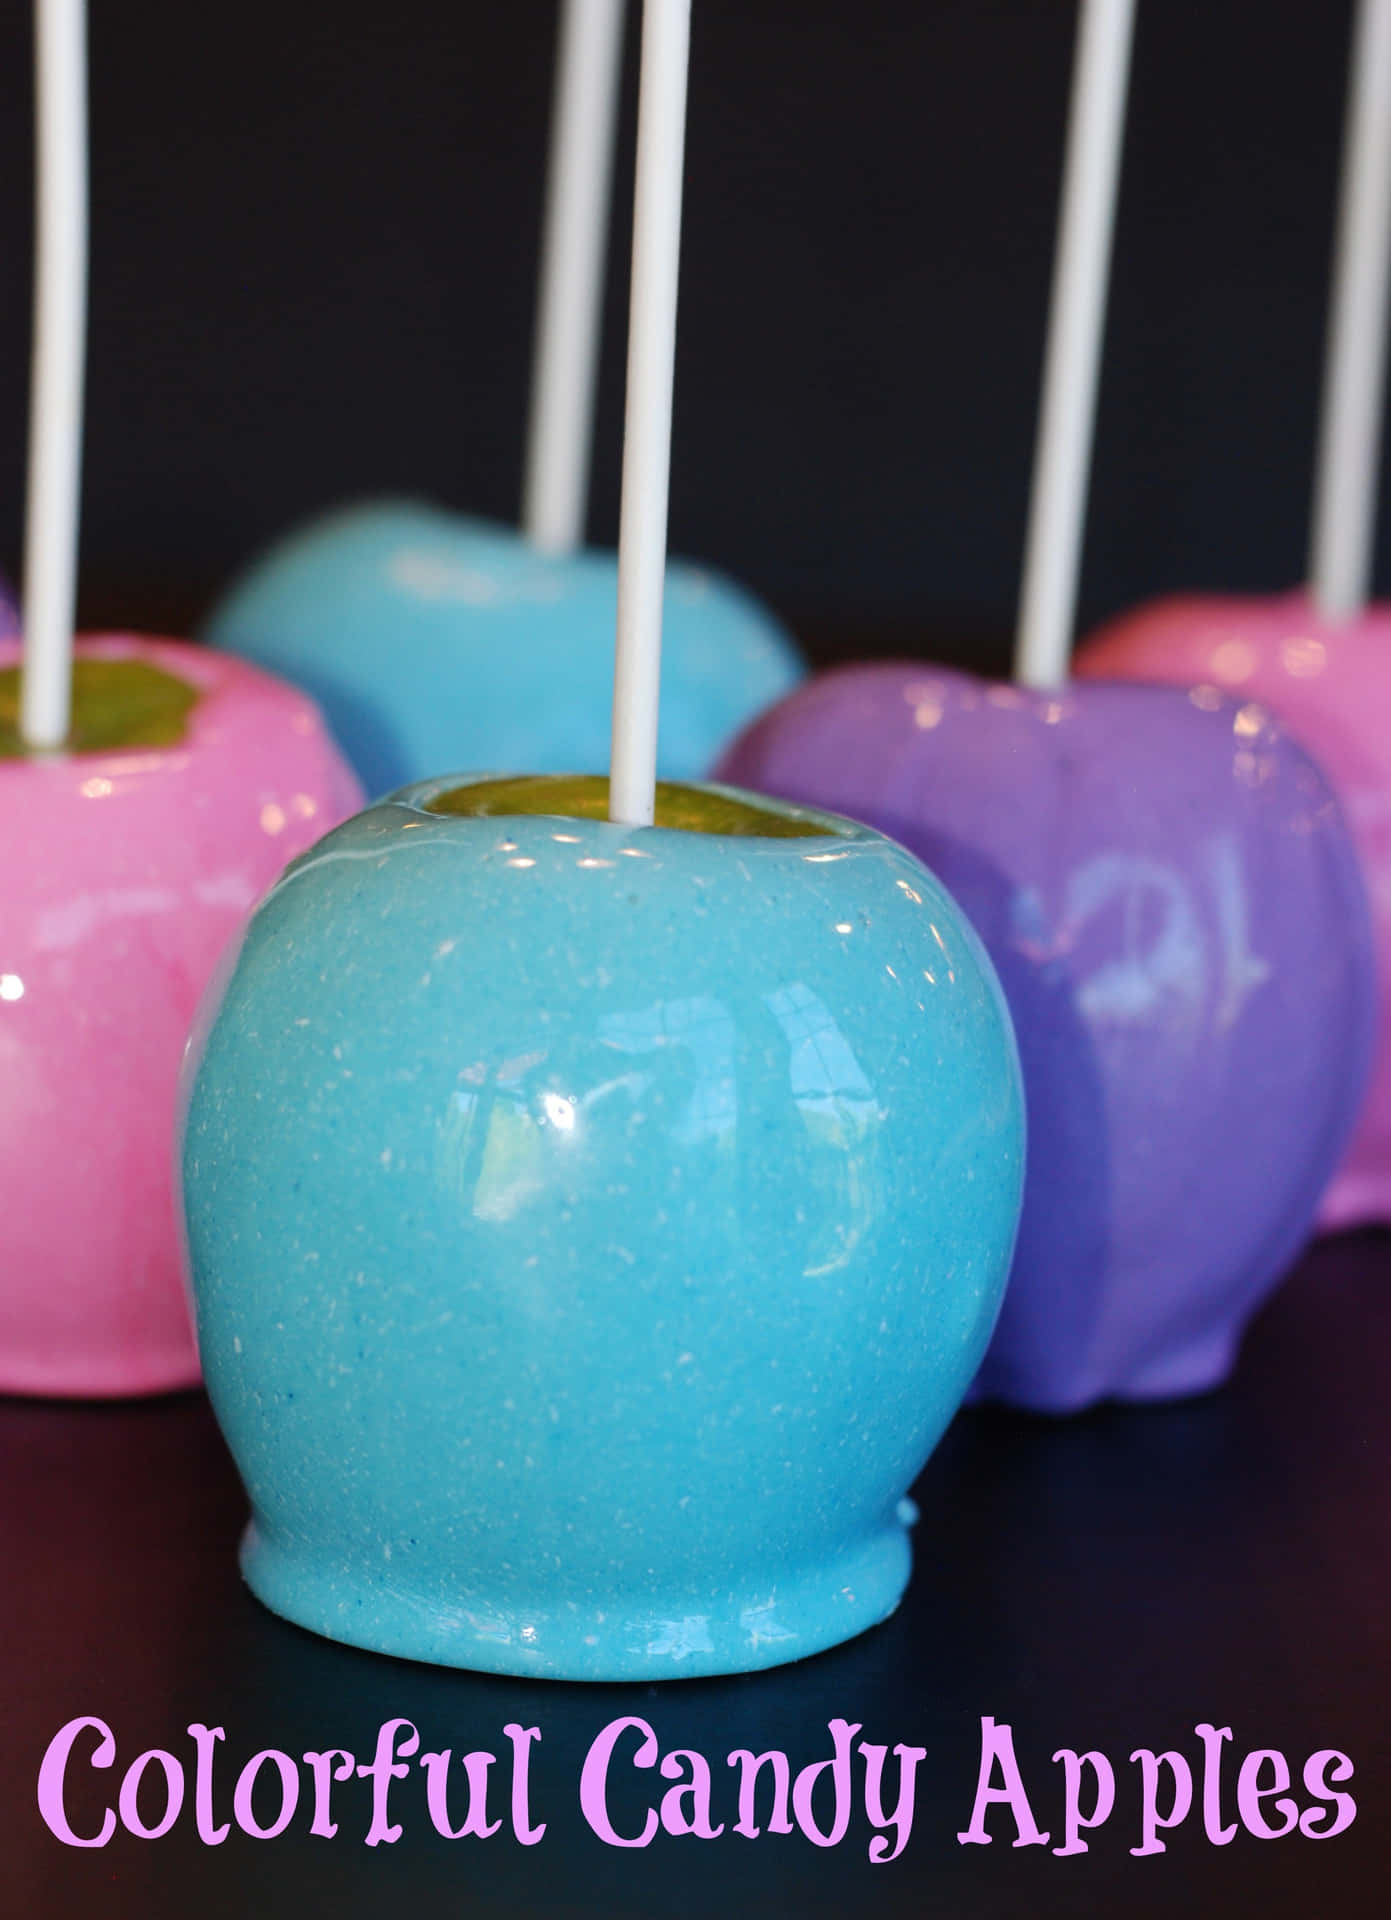 A Rainbow of Candy Apples Wallpaper